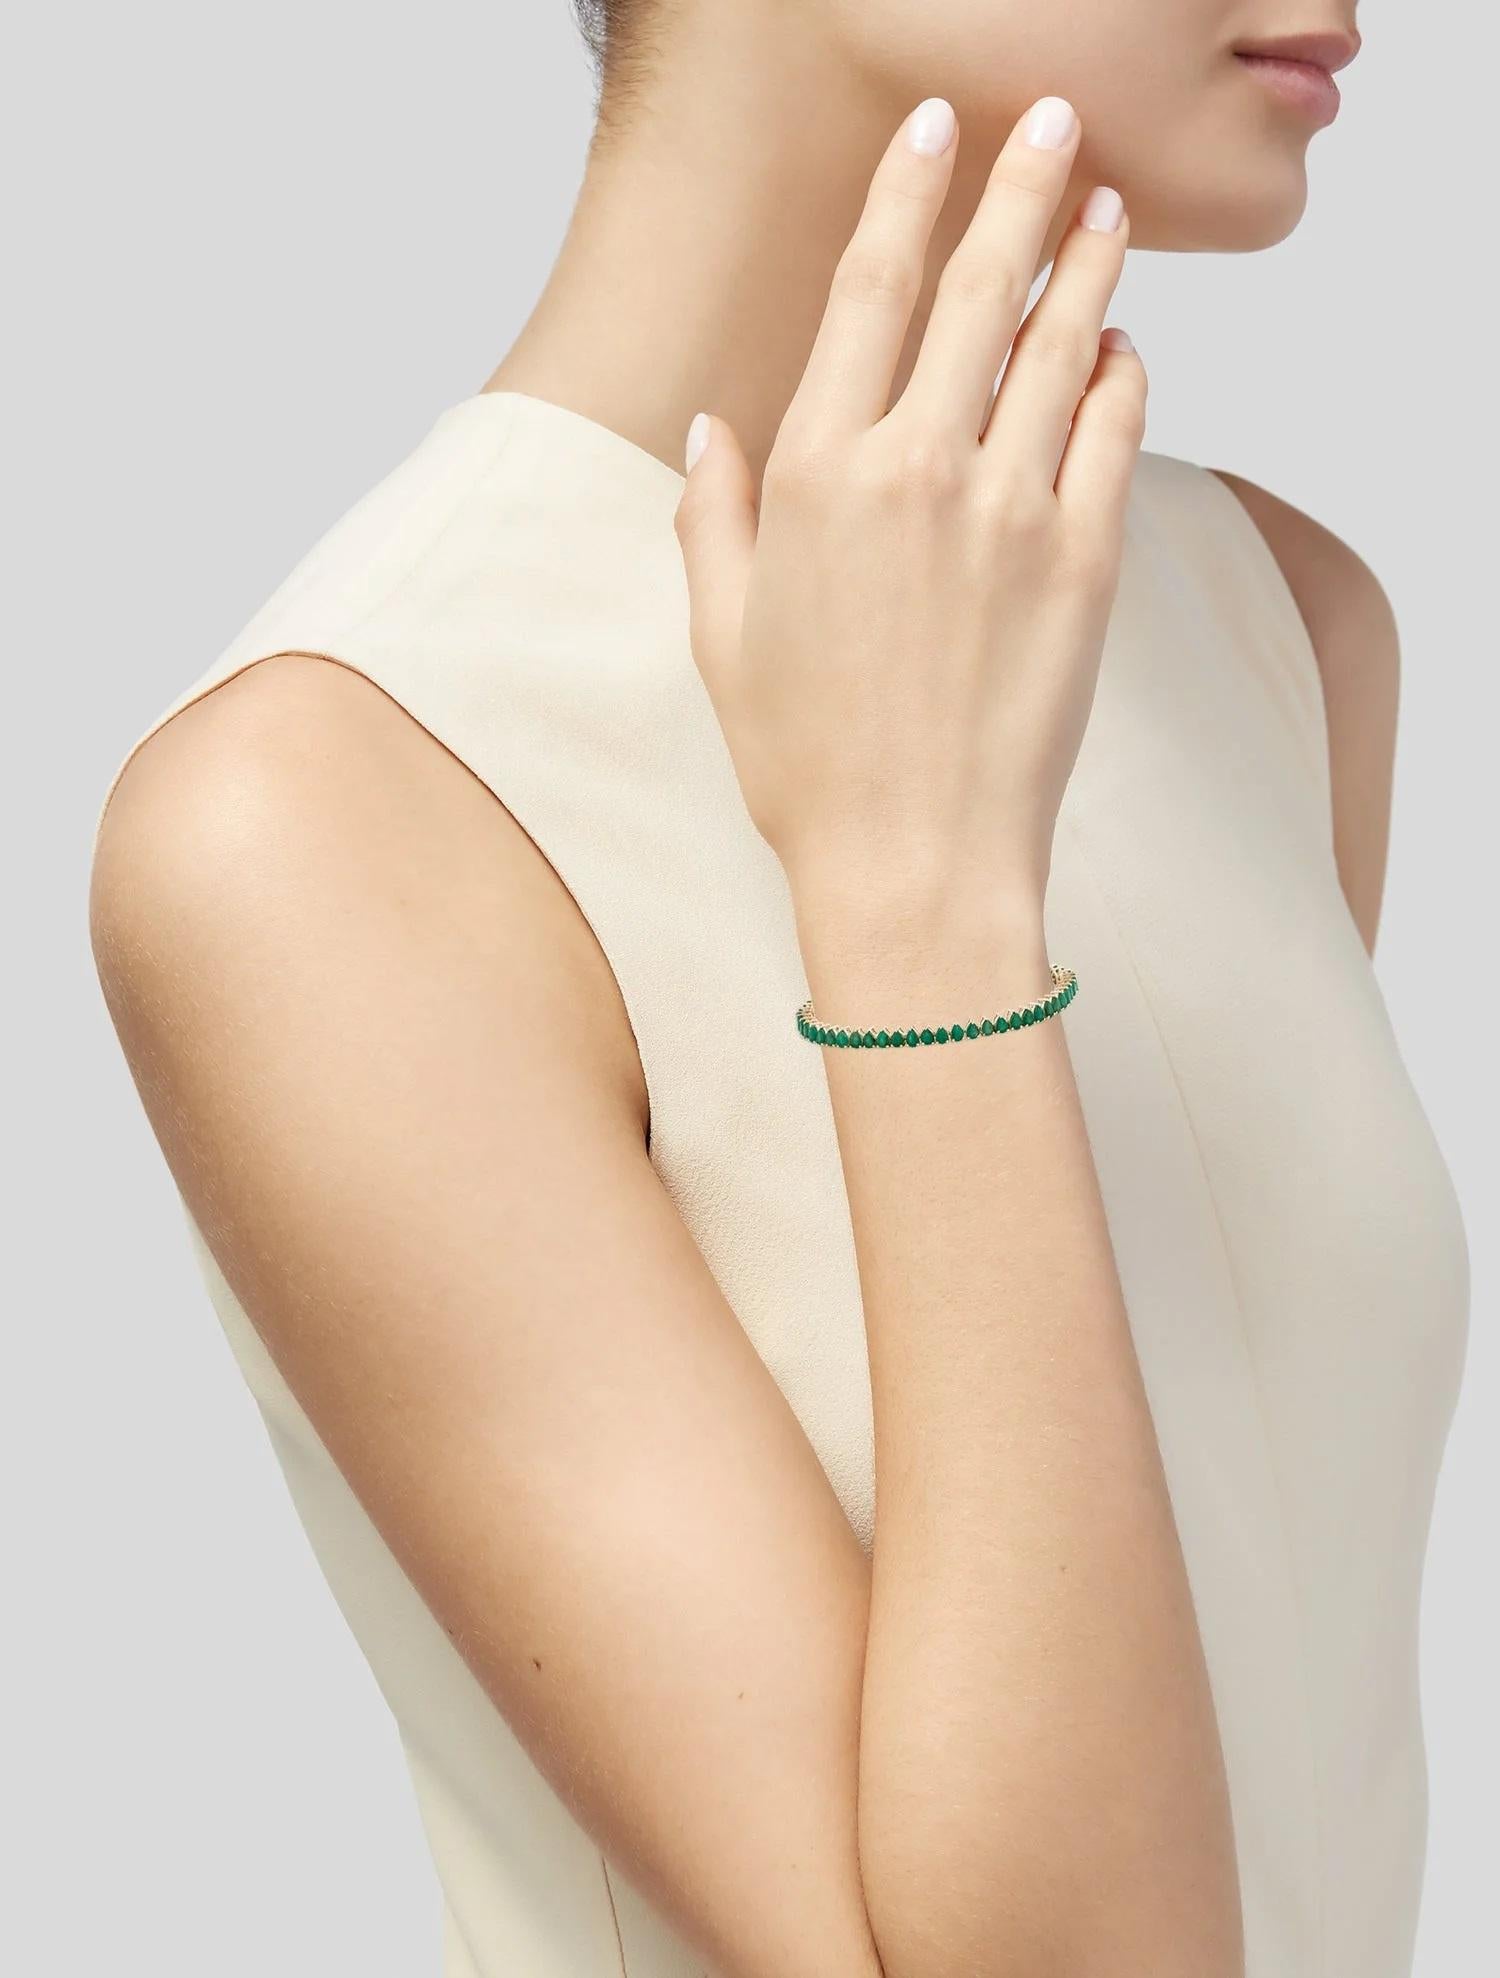 Elevate your jewelry collection with this exquisite 14K yellow gold link bracelet adorned with 6.04 carats of stunning pear modified brilliant emeralds. The rich green hue of the emeralds adds a touch of elegance and sophistication to any ensemble.